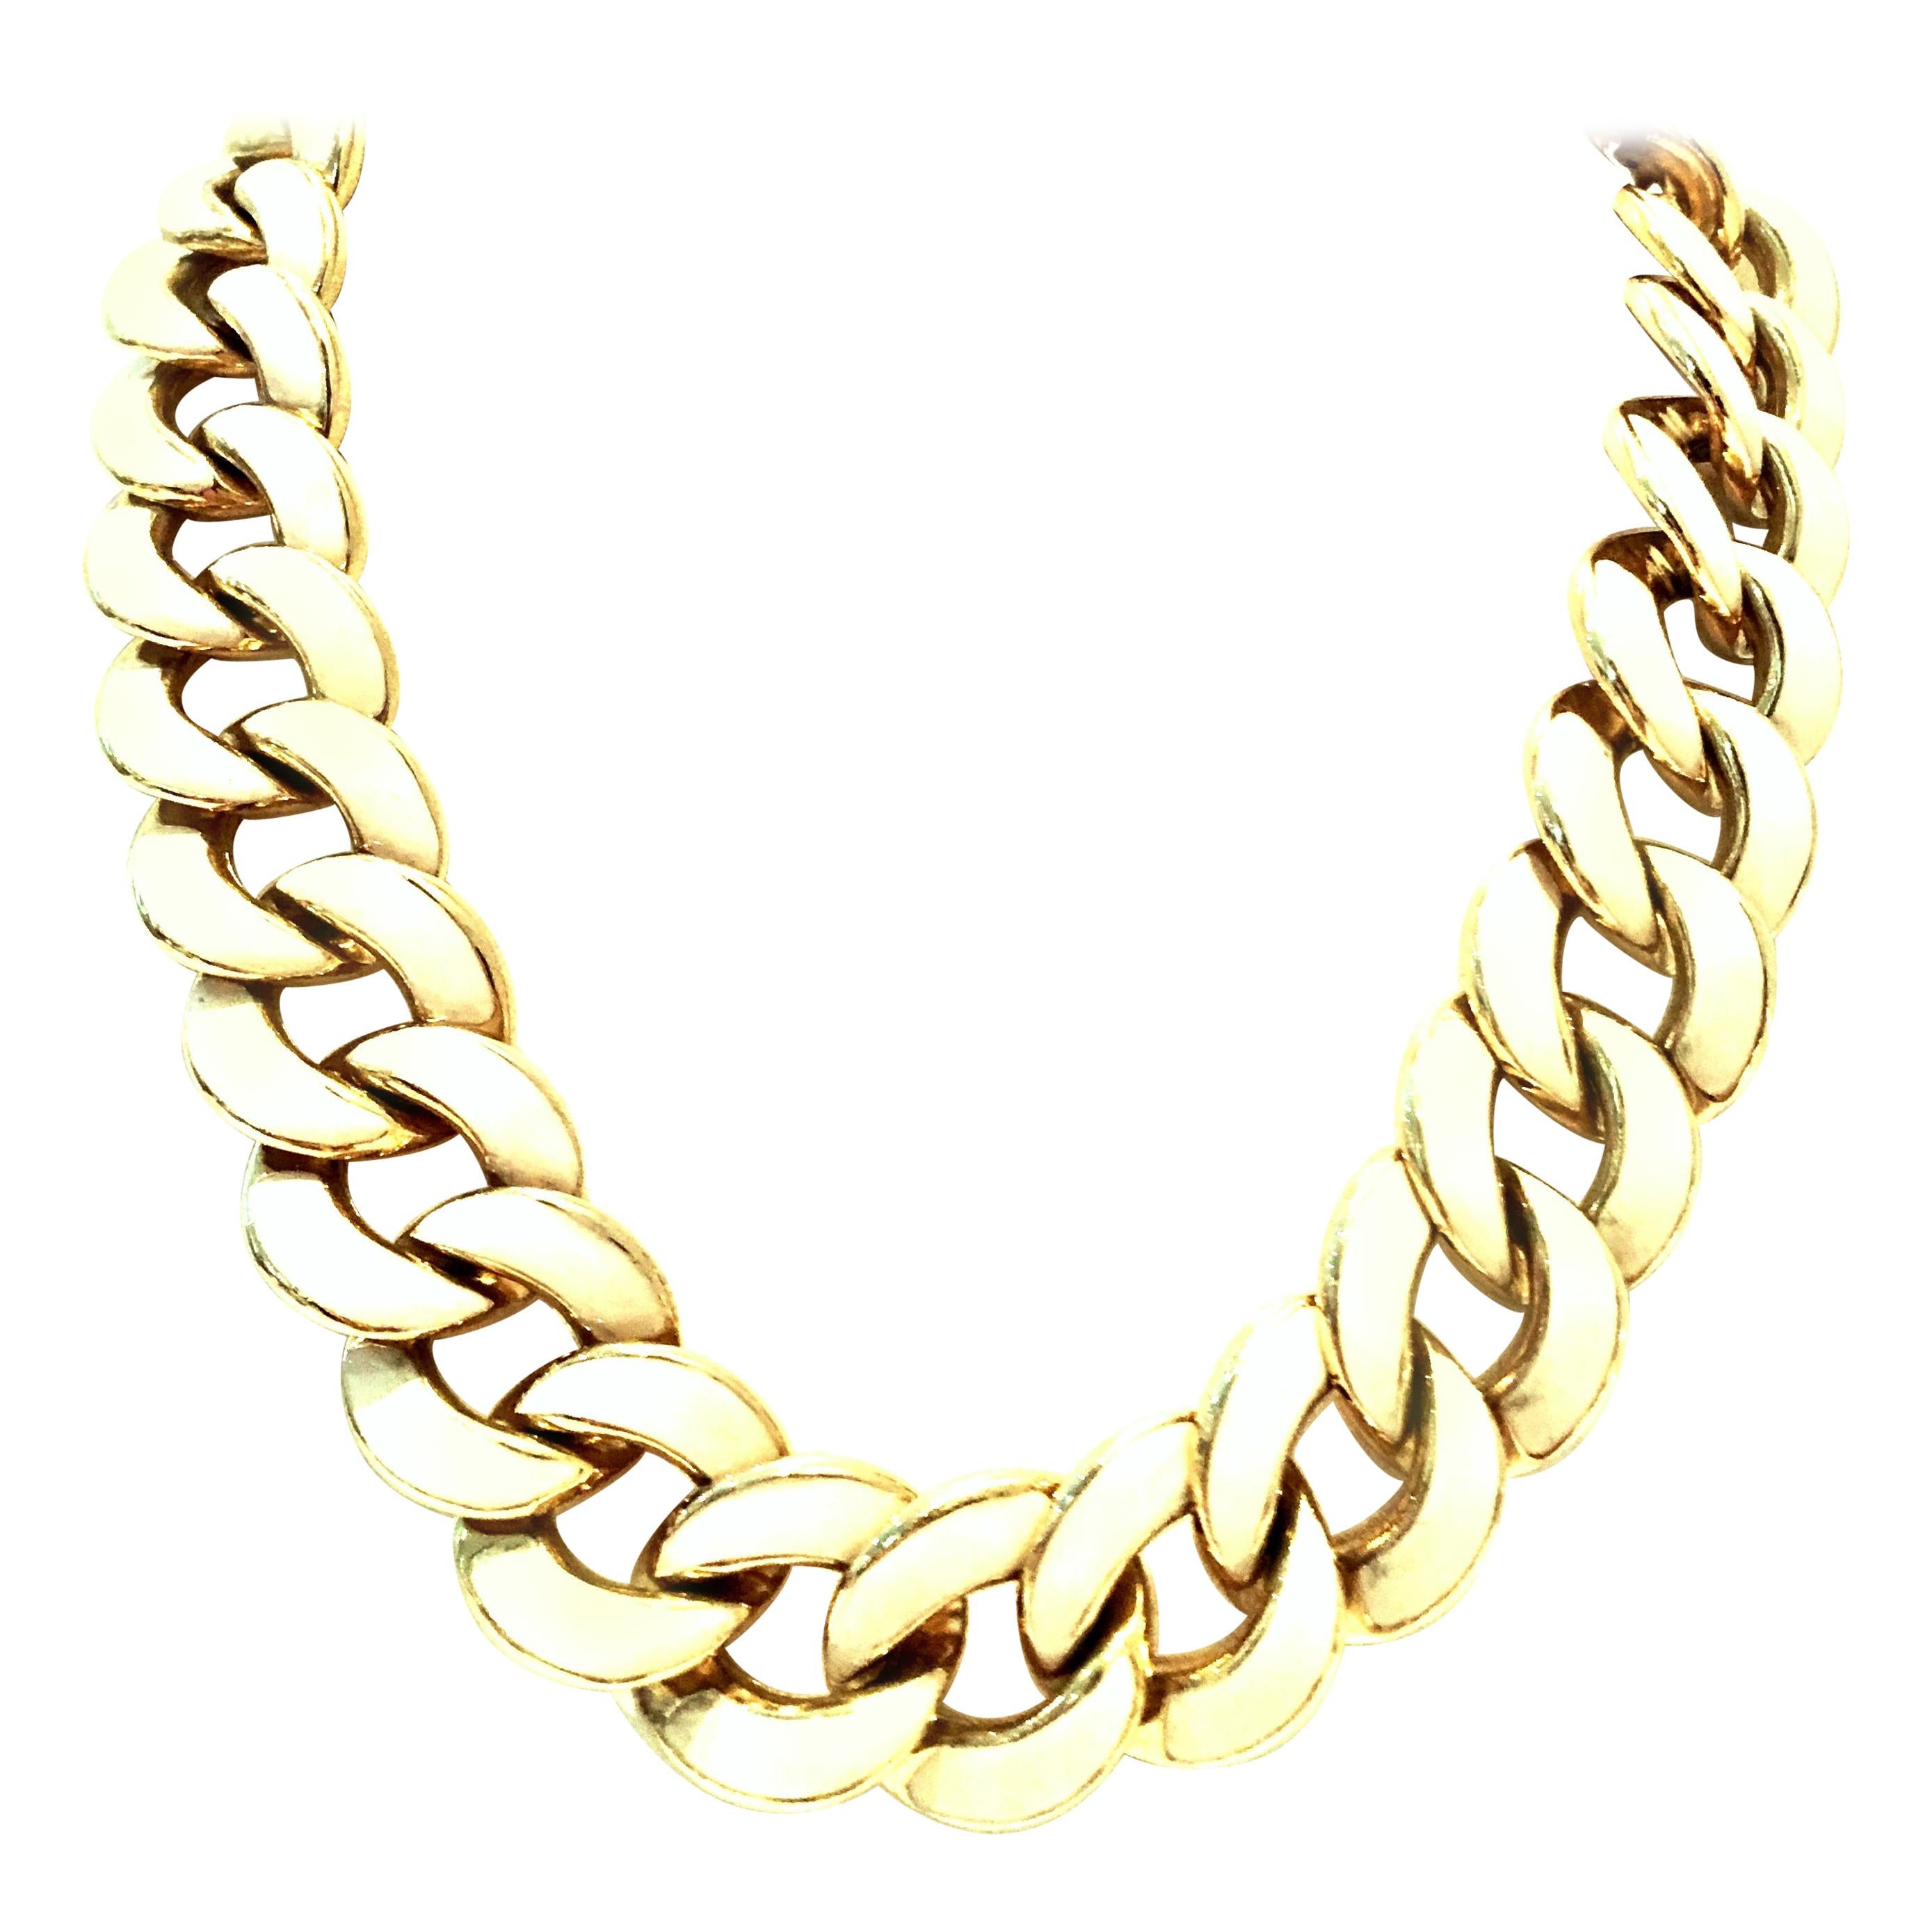 20th Century Gold & Enamel Chain Link Choker Necklace By, Les Bernard For Sale